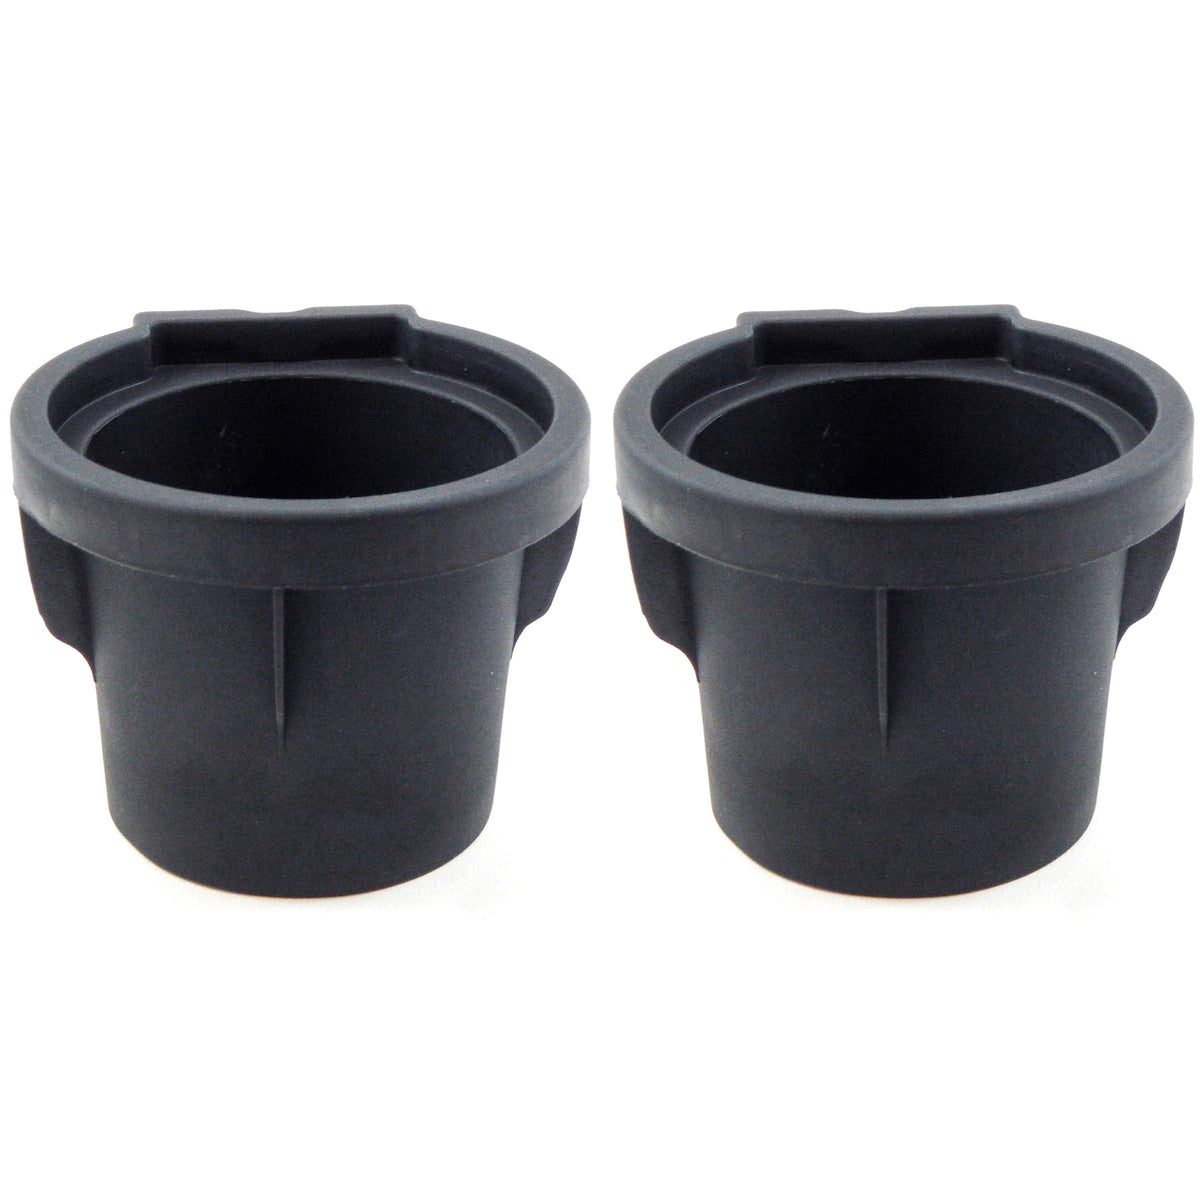 2X For Nissan Frontier Xterra 2005-2019 Console Cup Holder Inserts Liner  ⭐⭐⭐⭐⭐